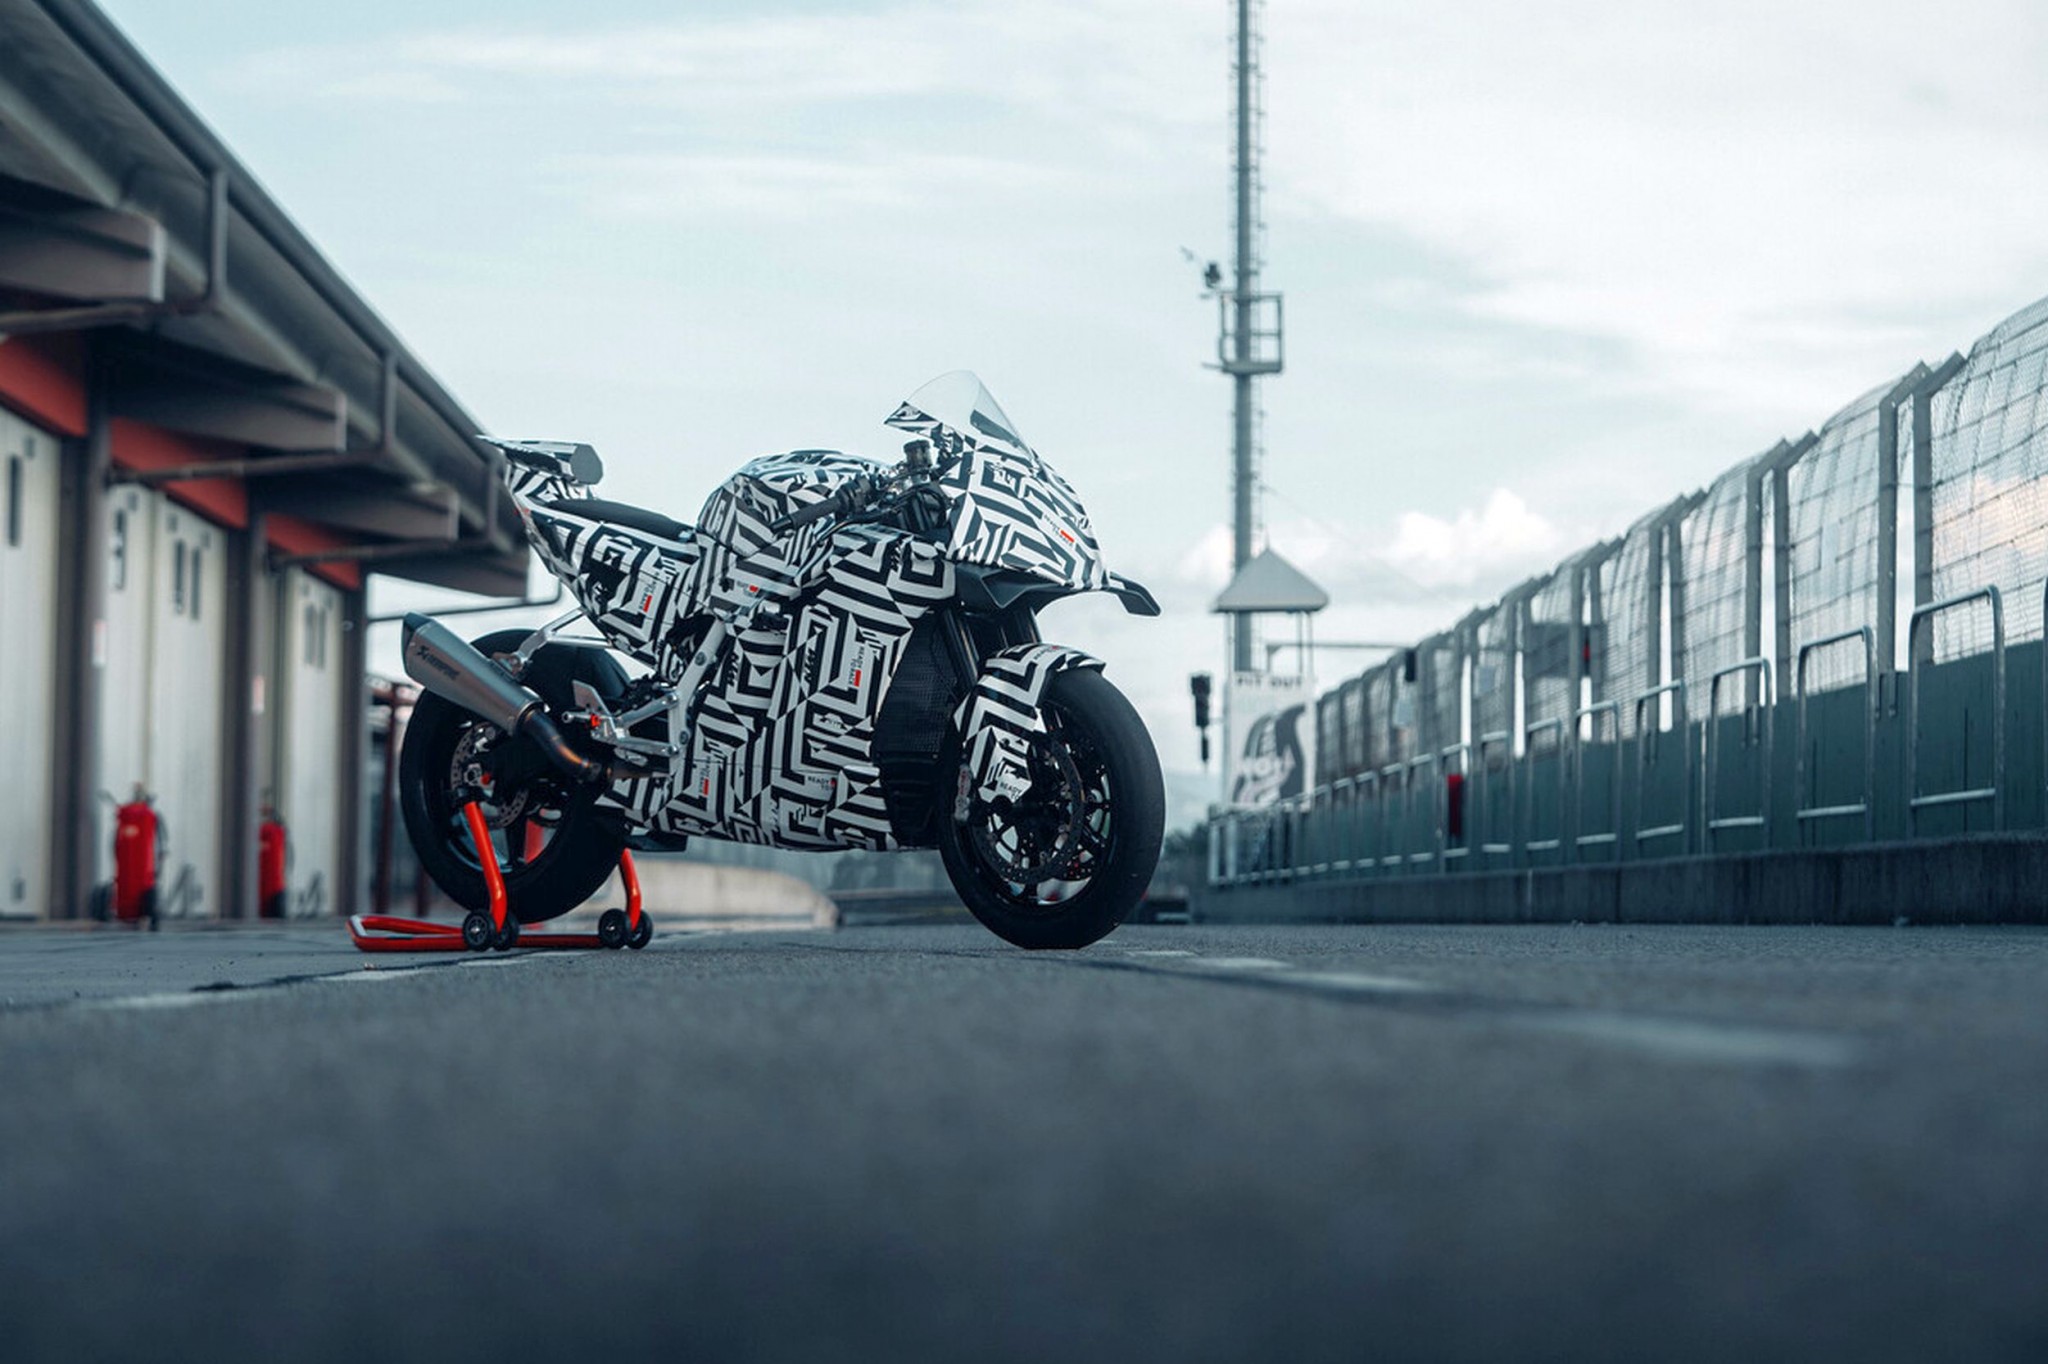 KTM 990 RC R - finally the thoroughbred sports bike for the road! - Image 16